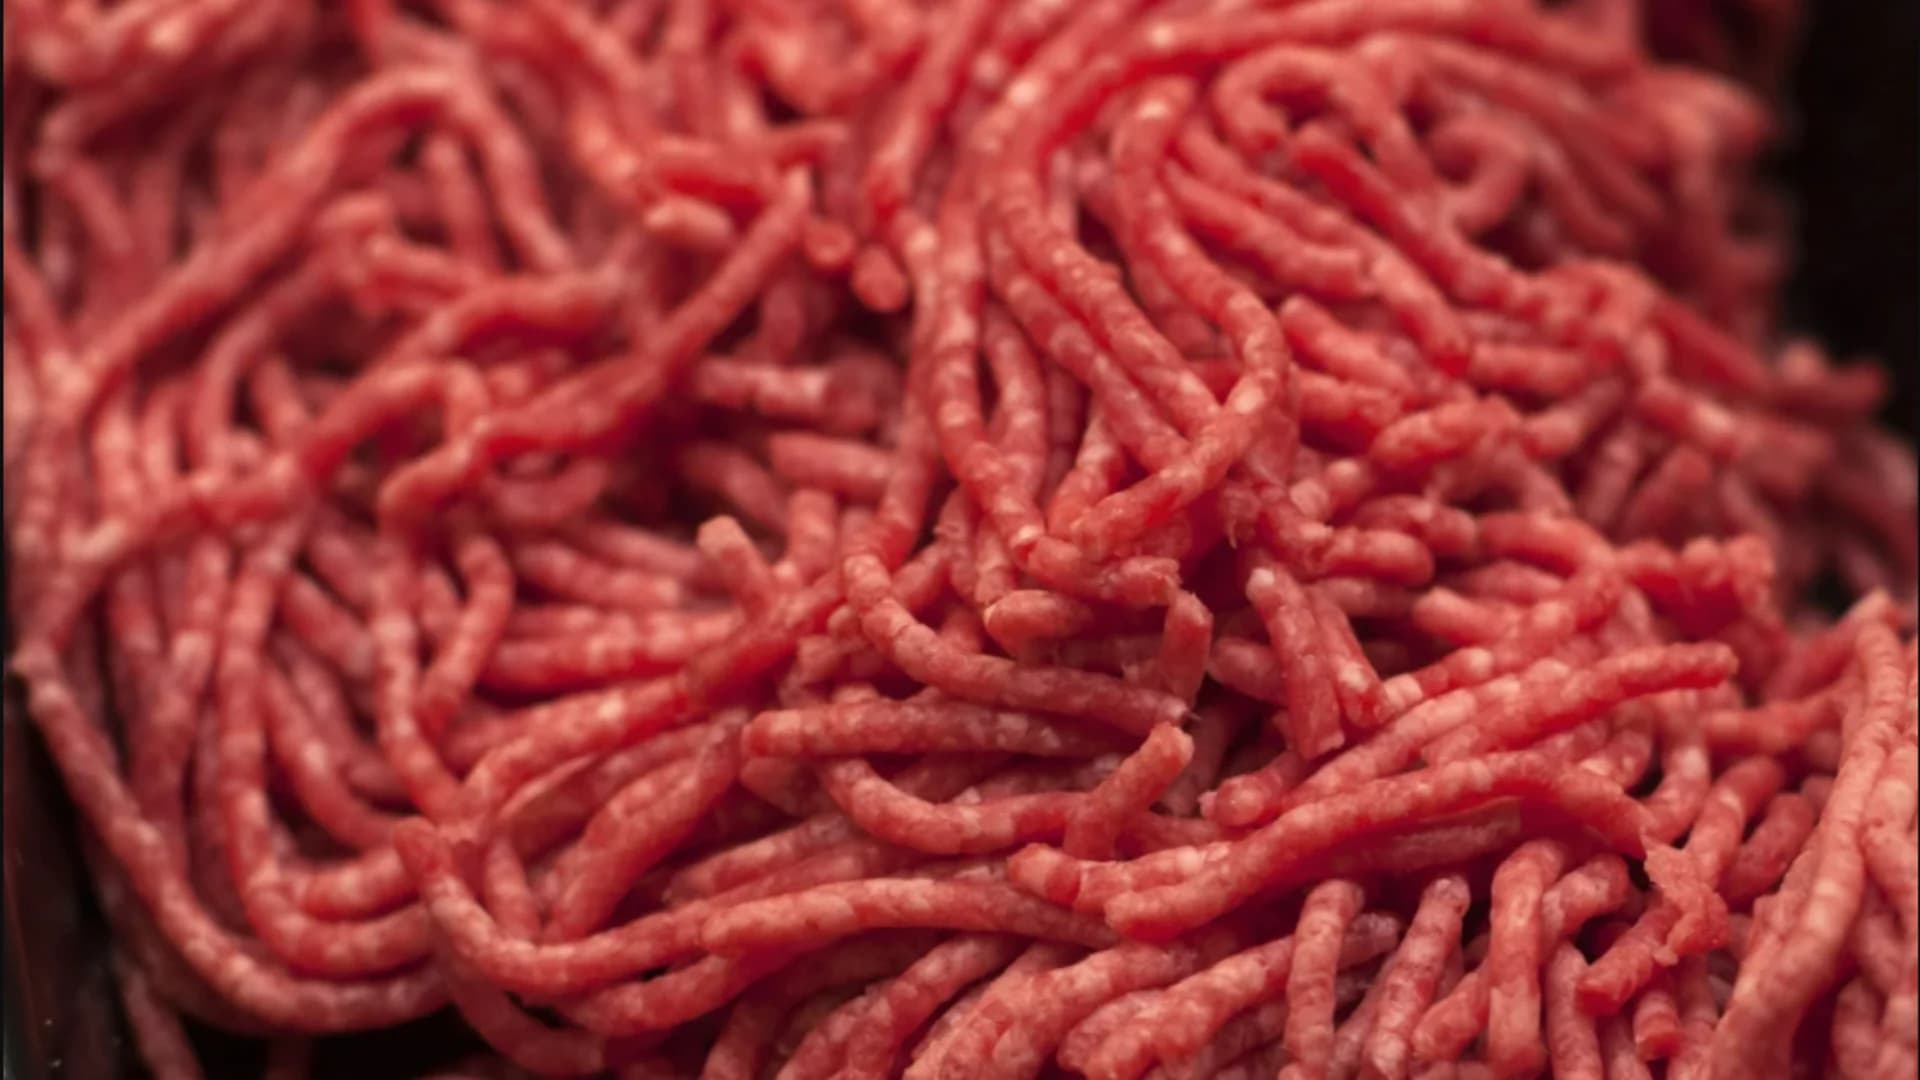 Salmonella in ground beef sickens 16, hospitalizing 6, in 4 states, CDC says